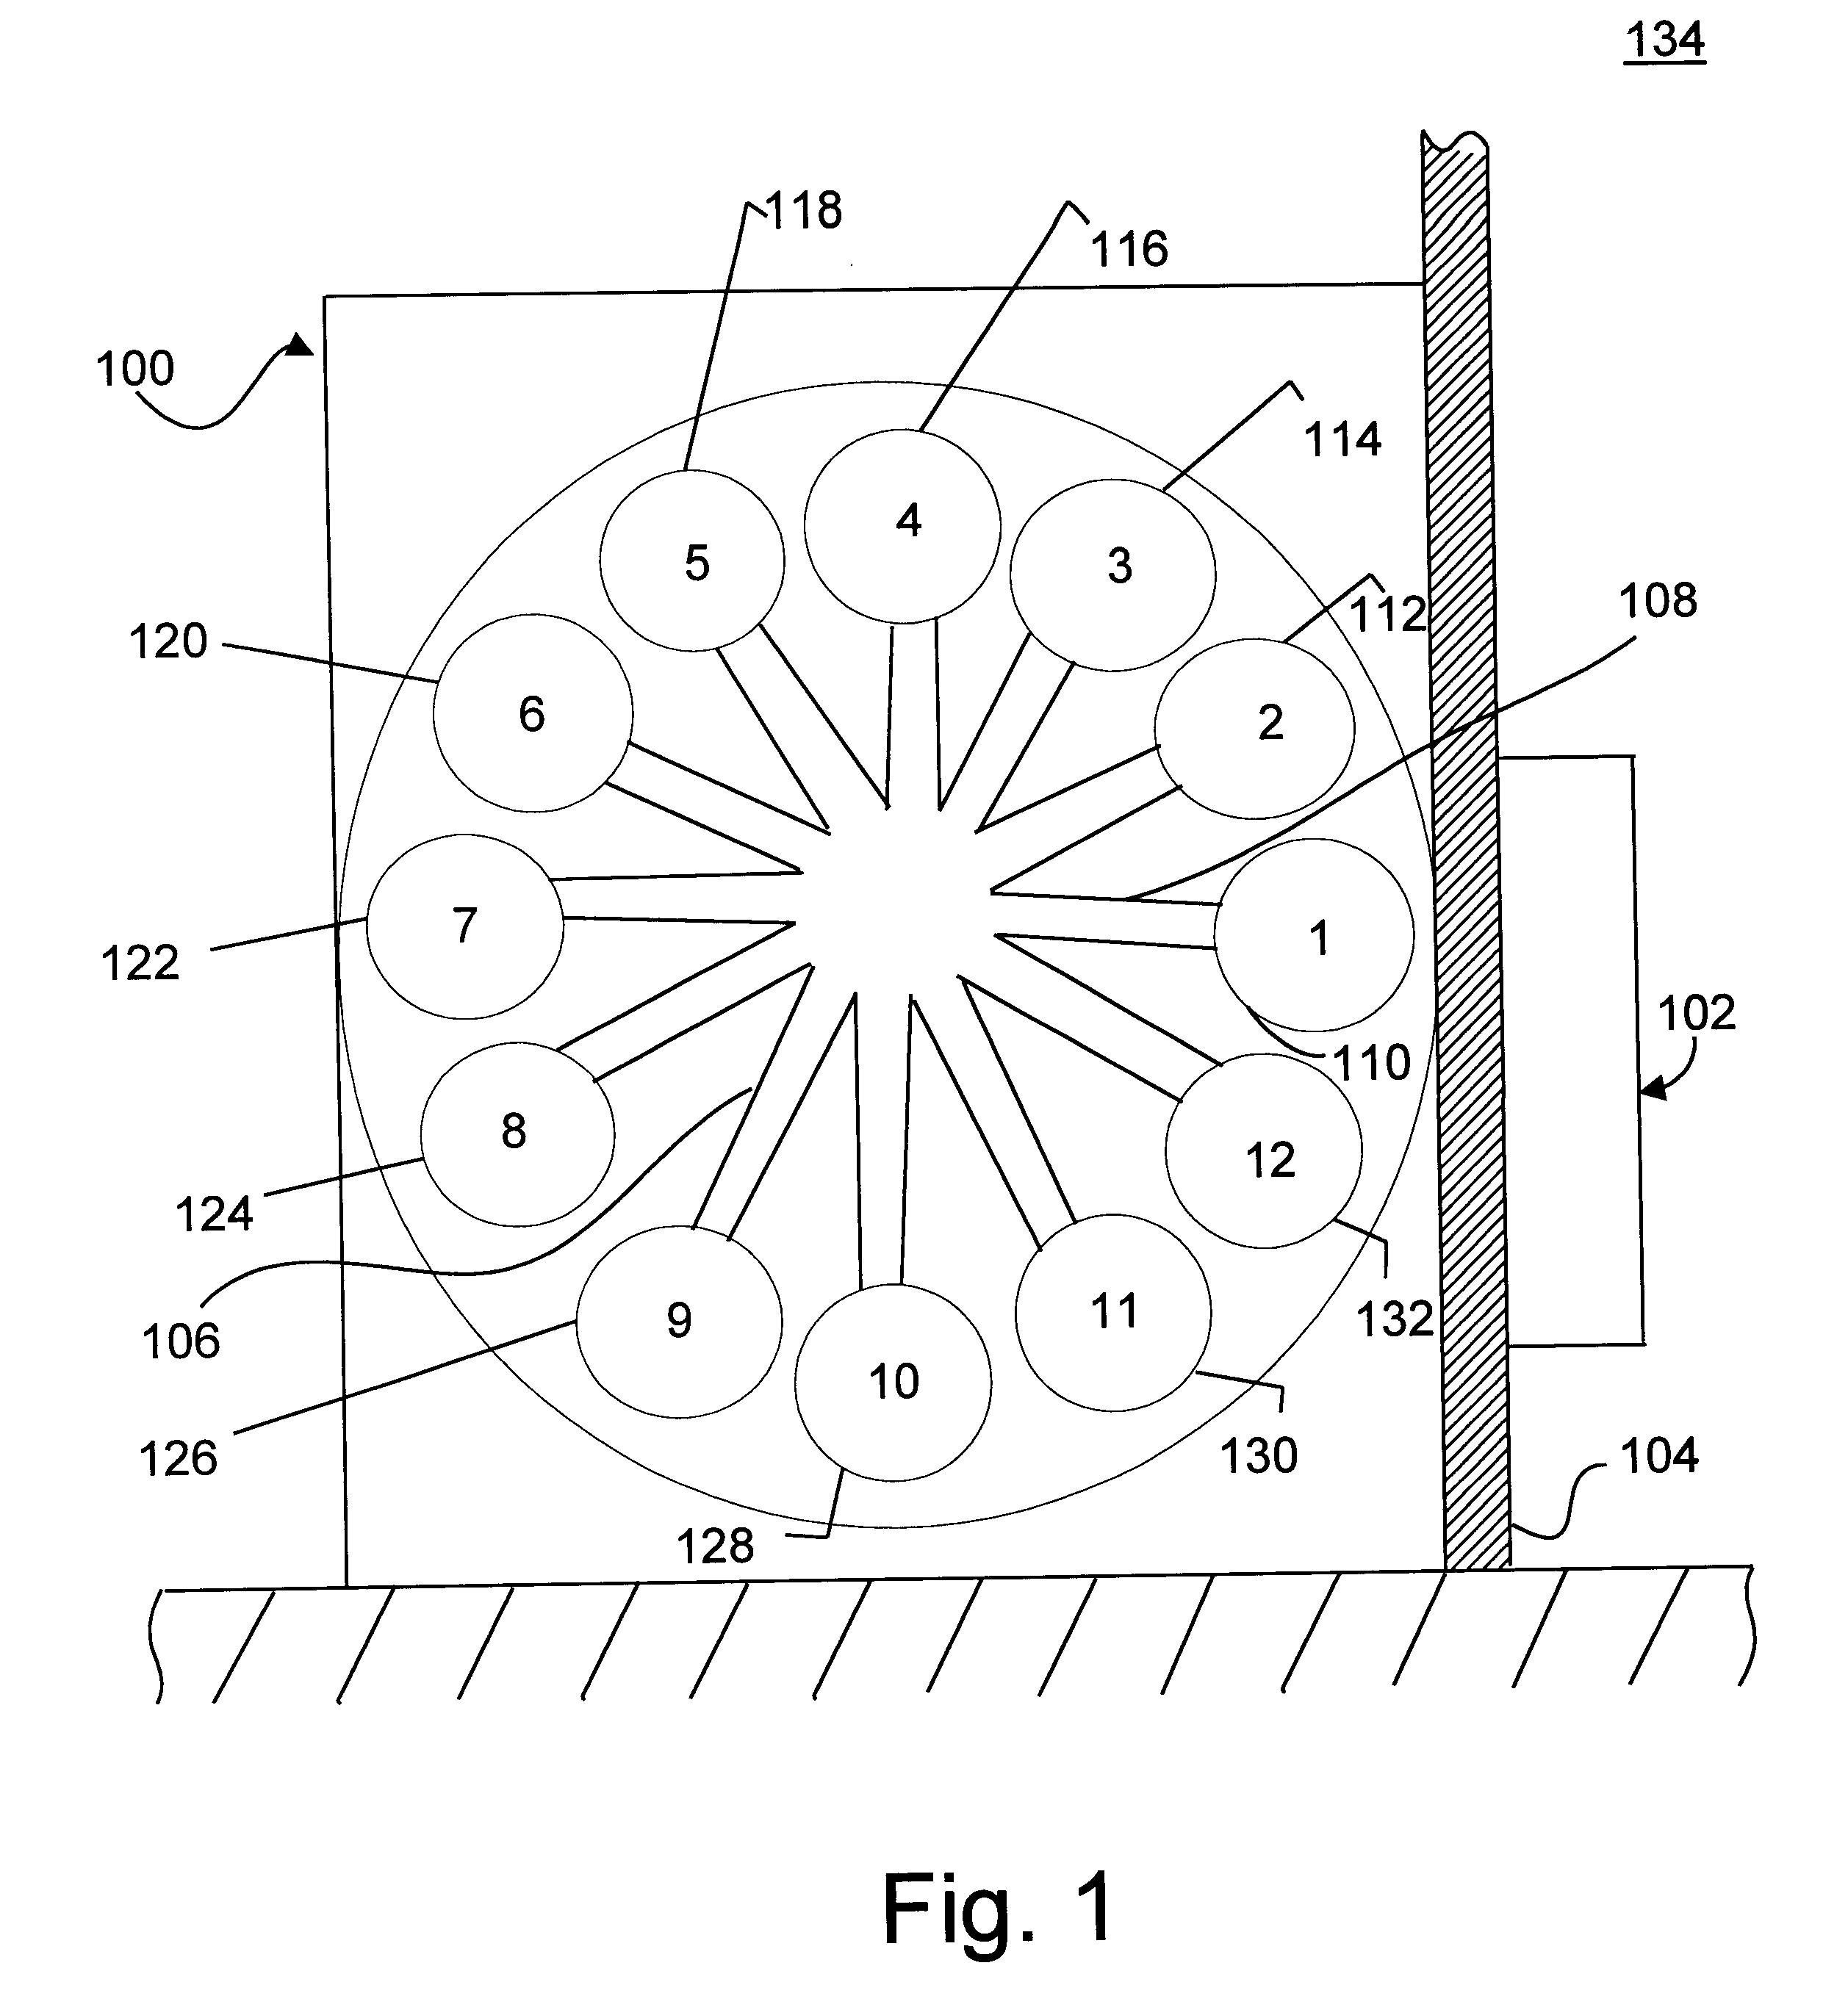 Multiple station vacuum deposition apparatus for texturing a substrate using a scanning beam